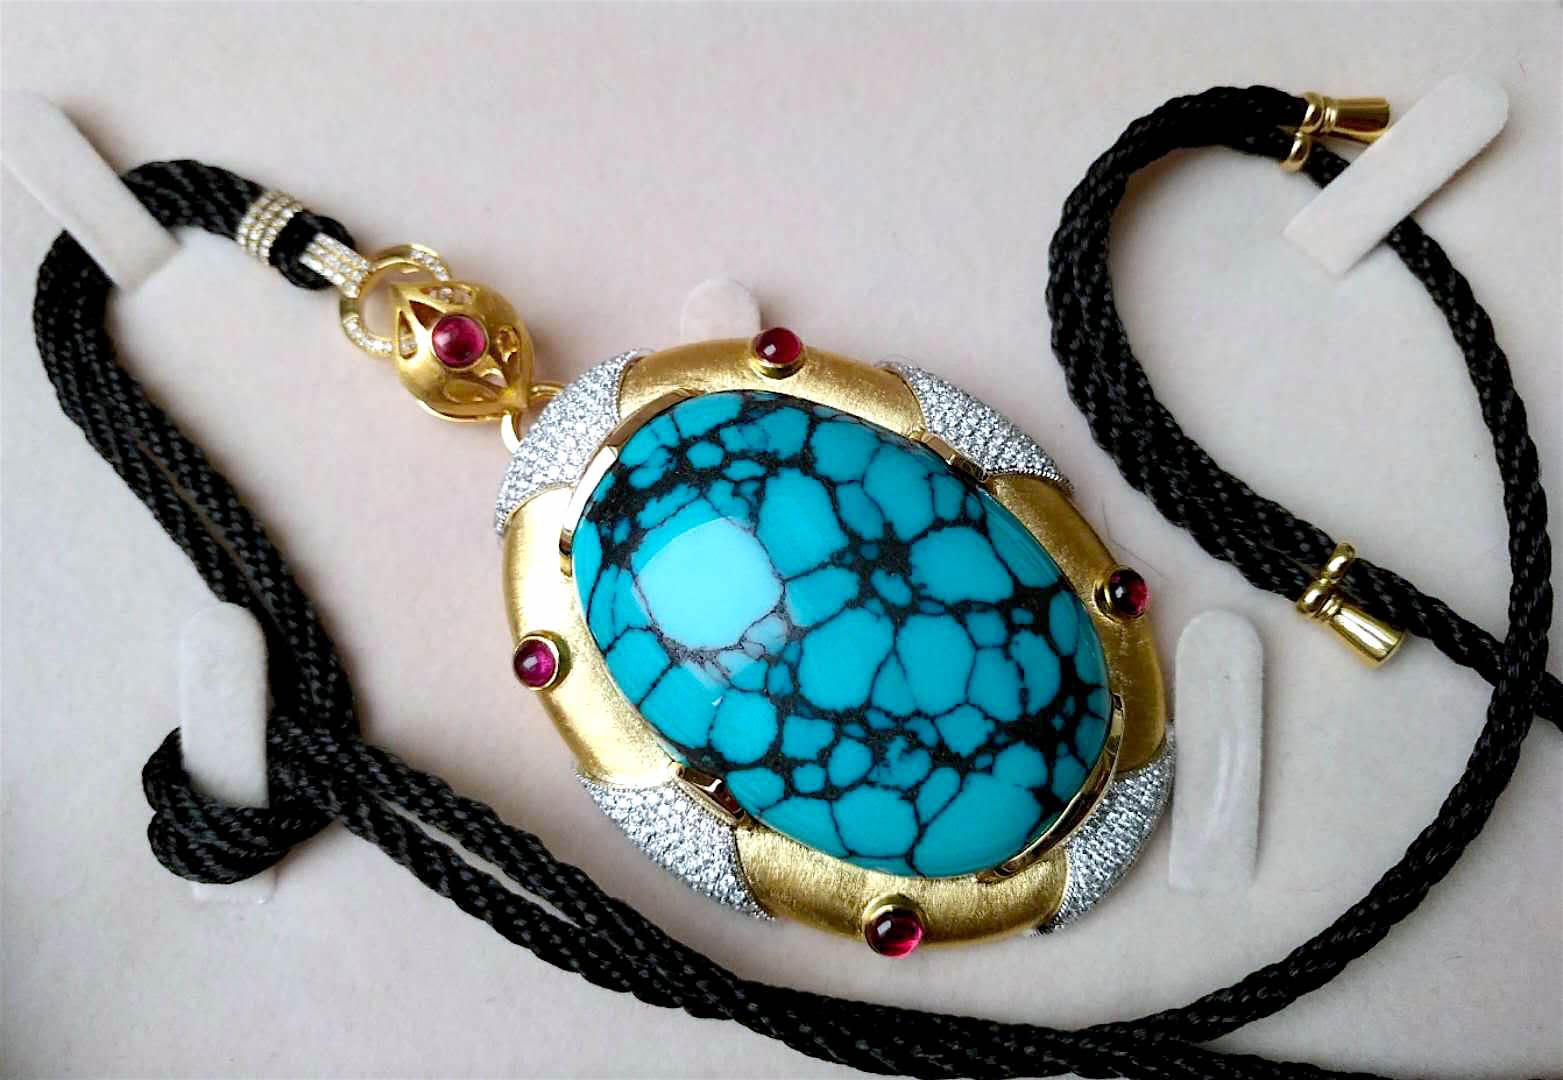 Cabochon 160CTS Top Grade YunGai Turquoise 18 Karat Gold Pandent Necklace, Diamond & Ruby For Sale